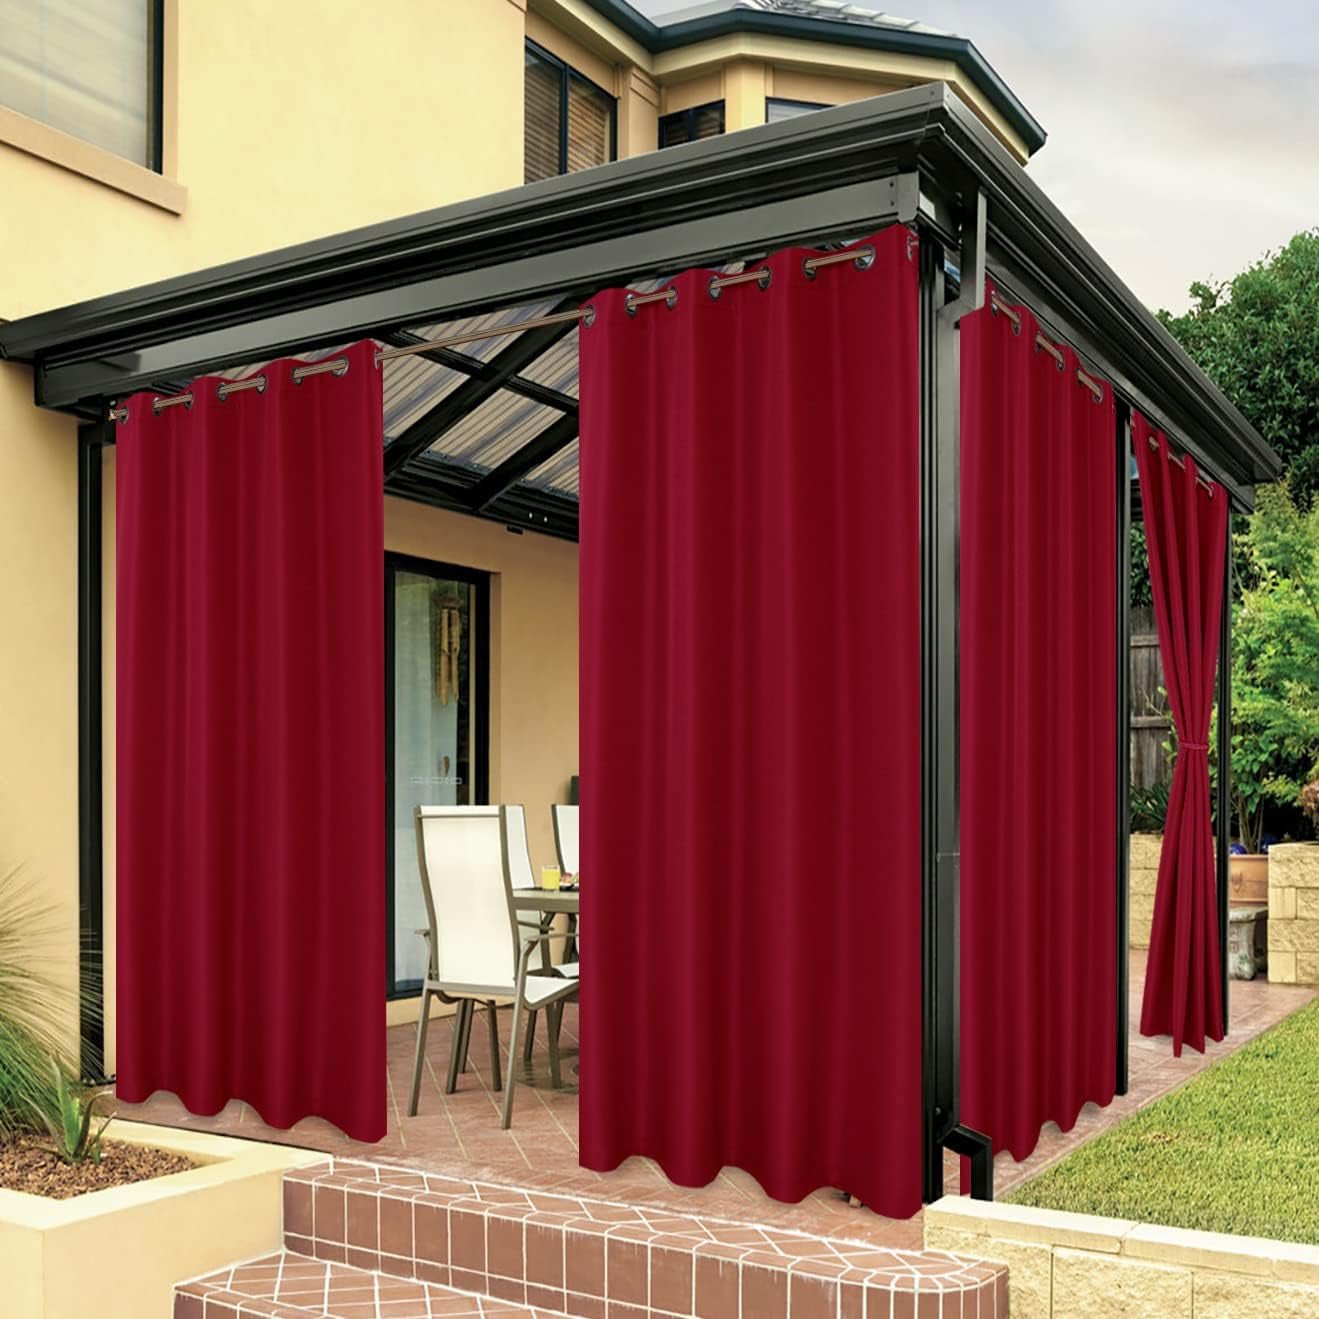 BONZER Outdoor Curtains for Patio Waterproof, Premium Thick Privacy Weatherproof Grommet outside Curtains for Porch, Gazebo, Deck, 1 Panel, 54W X 84L Inch, White  BONZER Red 54W X 120L Inch 